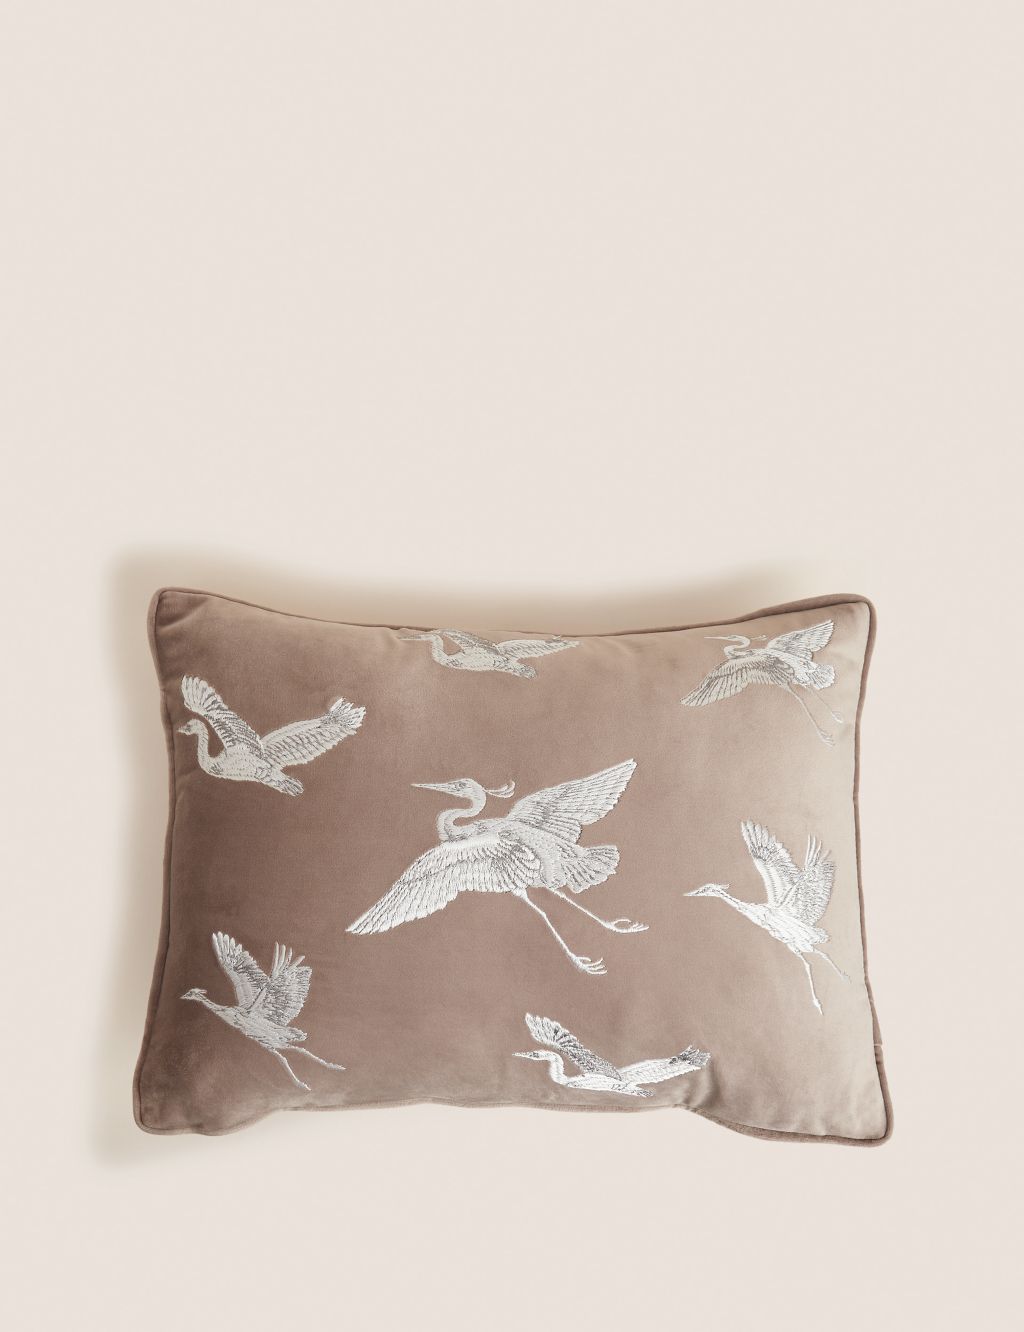 Crane Embroidered Bolster Cushion image 1